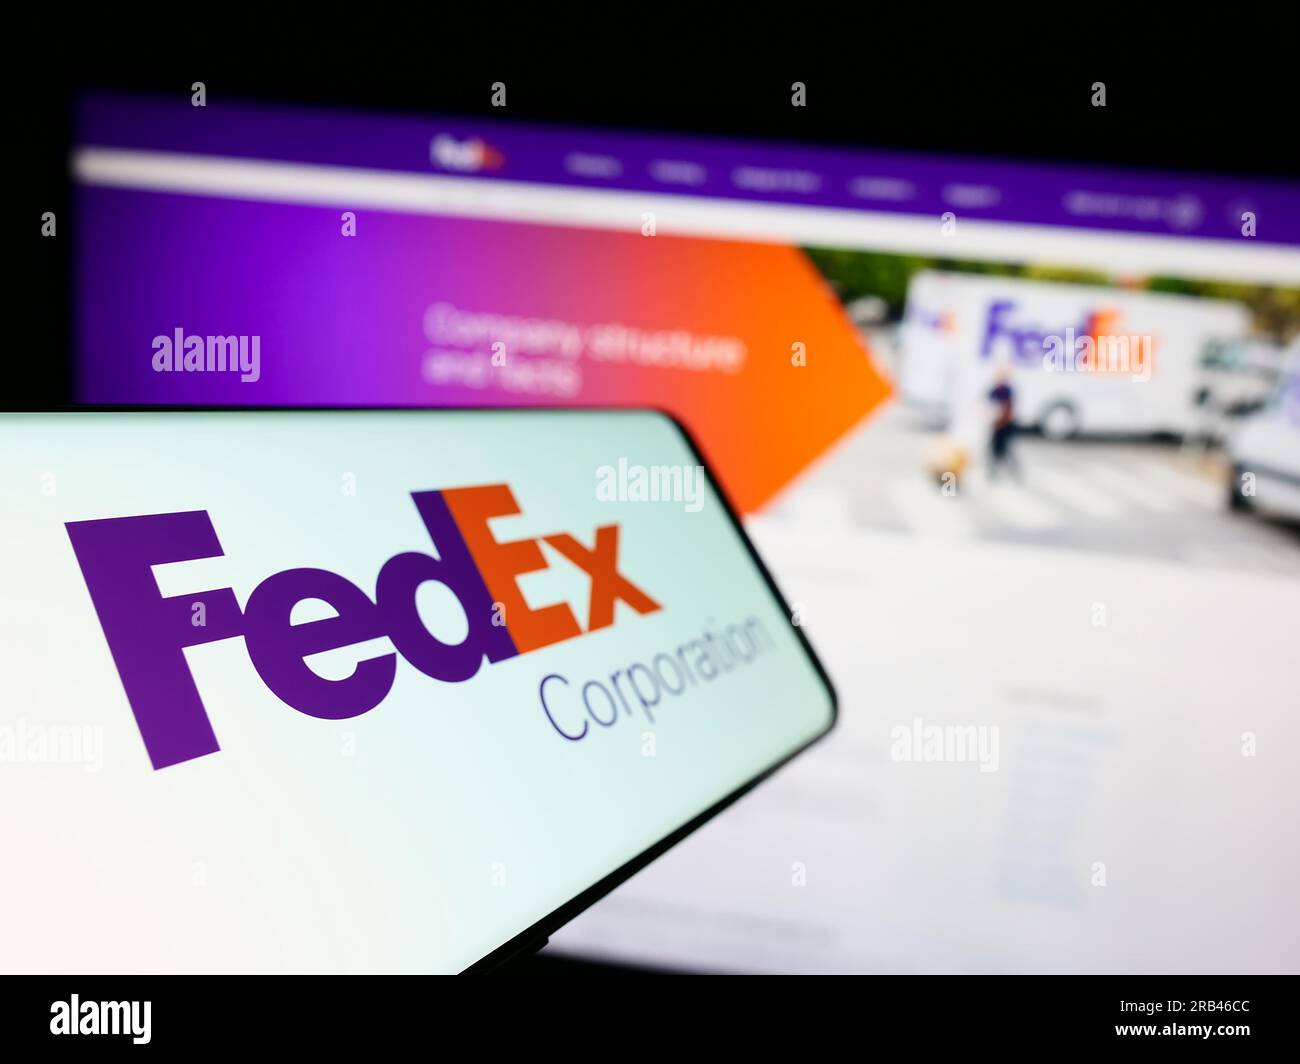 Mobile phone with logo of American logistics company FedEx Corporation on screen in front of business website. Focus on left of phone display. Stock Photo